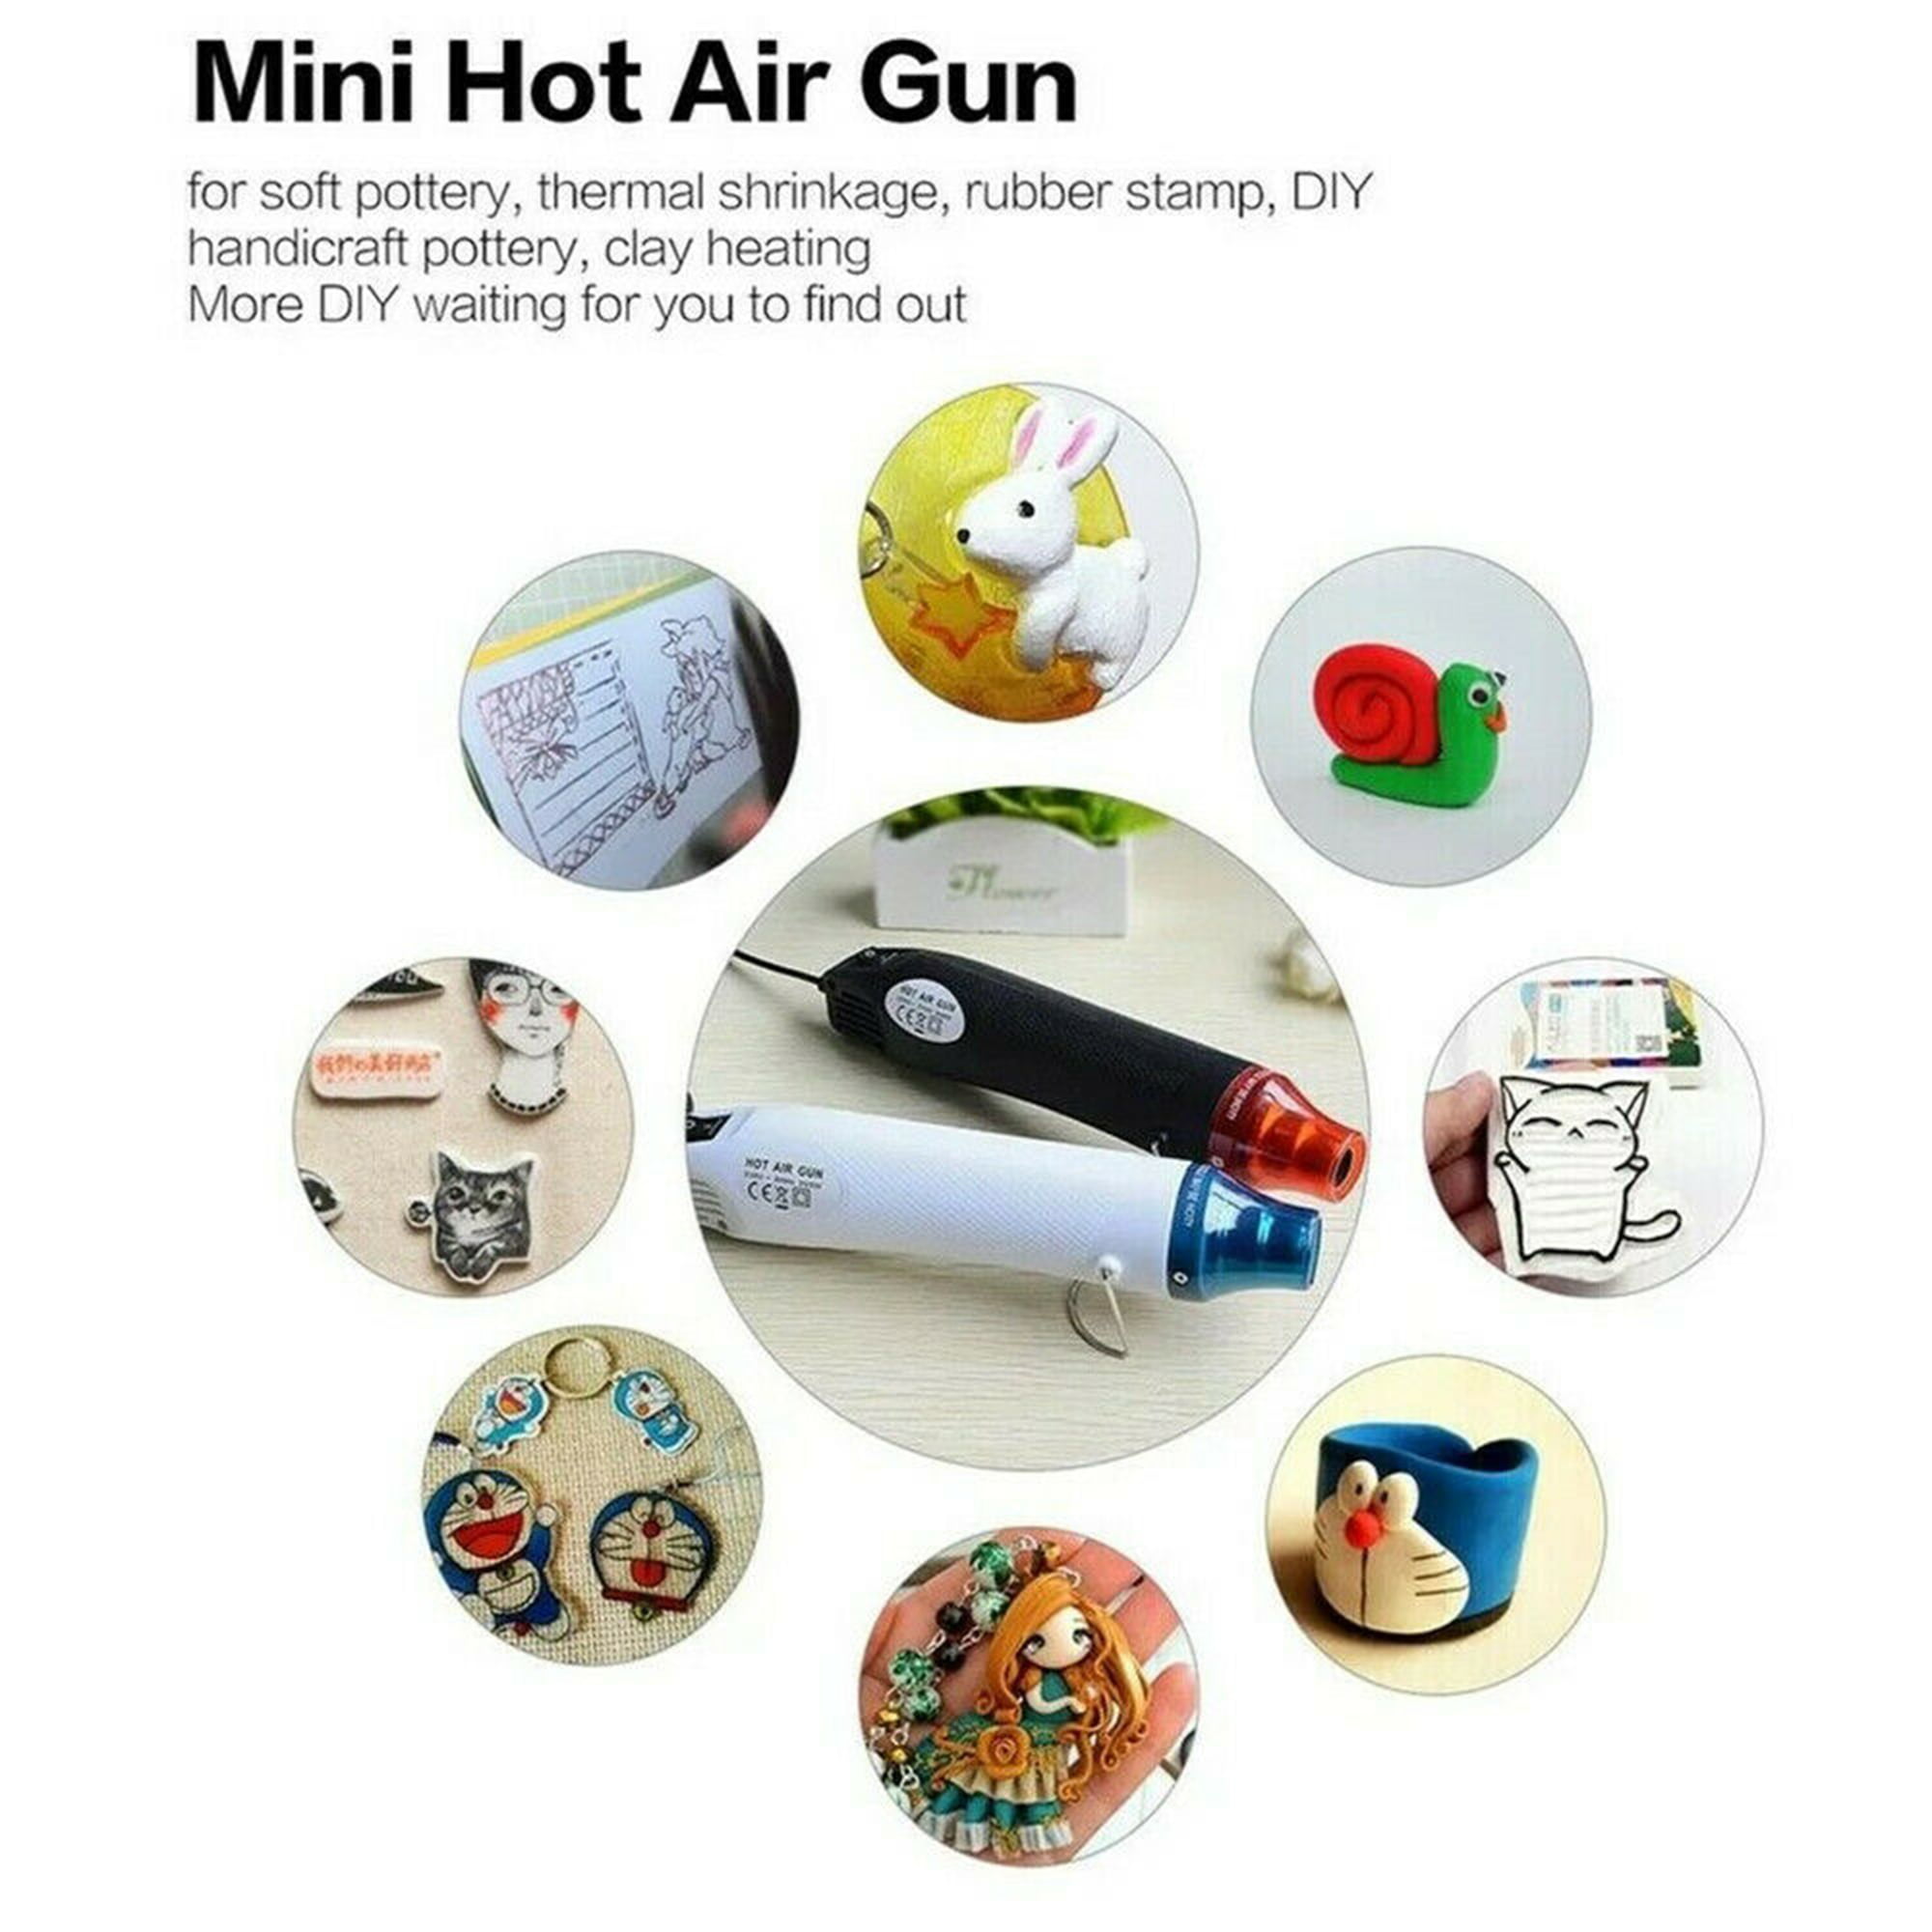 300W Portable Heat Gun for DIY Craft Embossing, Shrink Wrapping PVC, Drying  Paint, Clay, Rubber Stamp - AliExpress